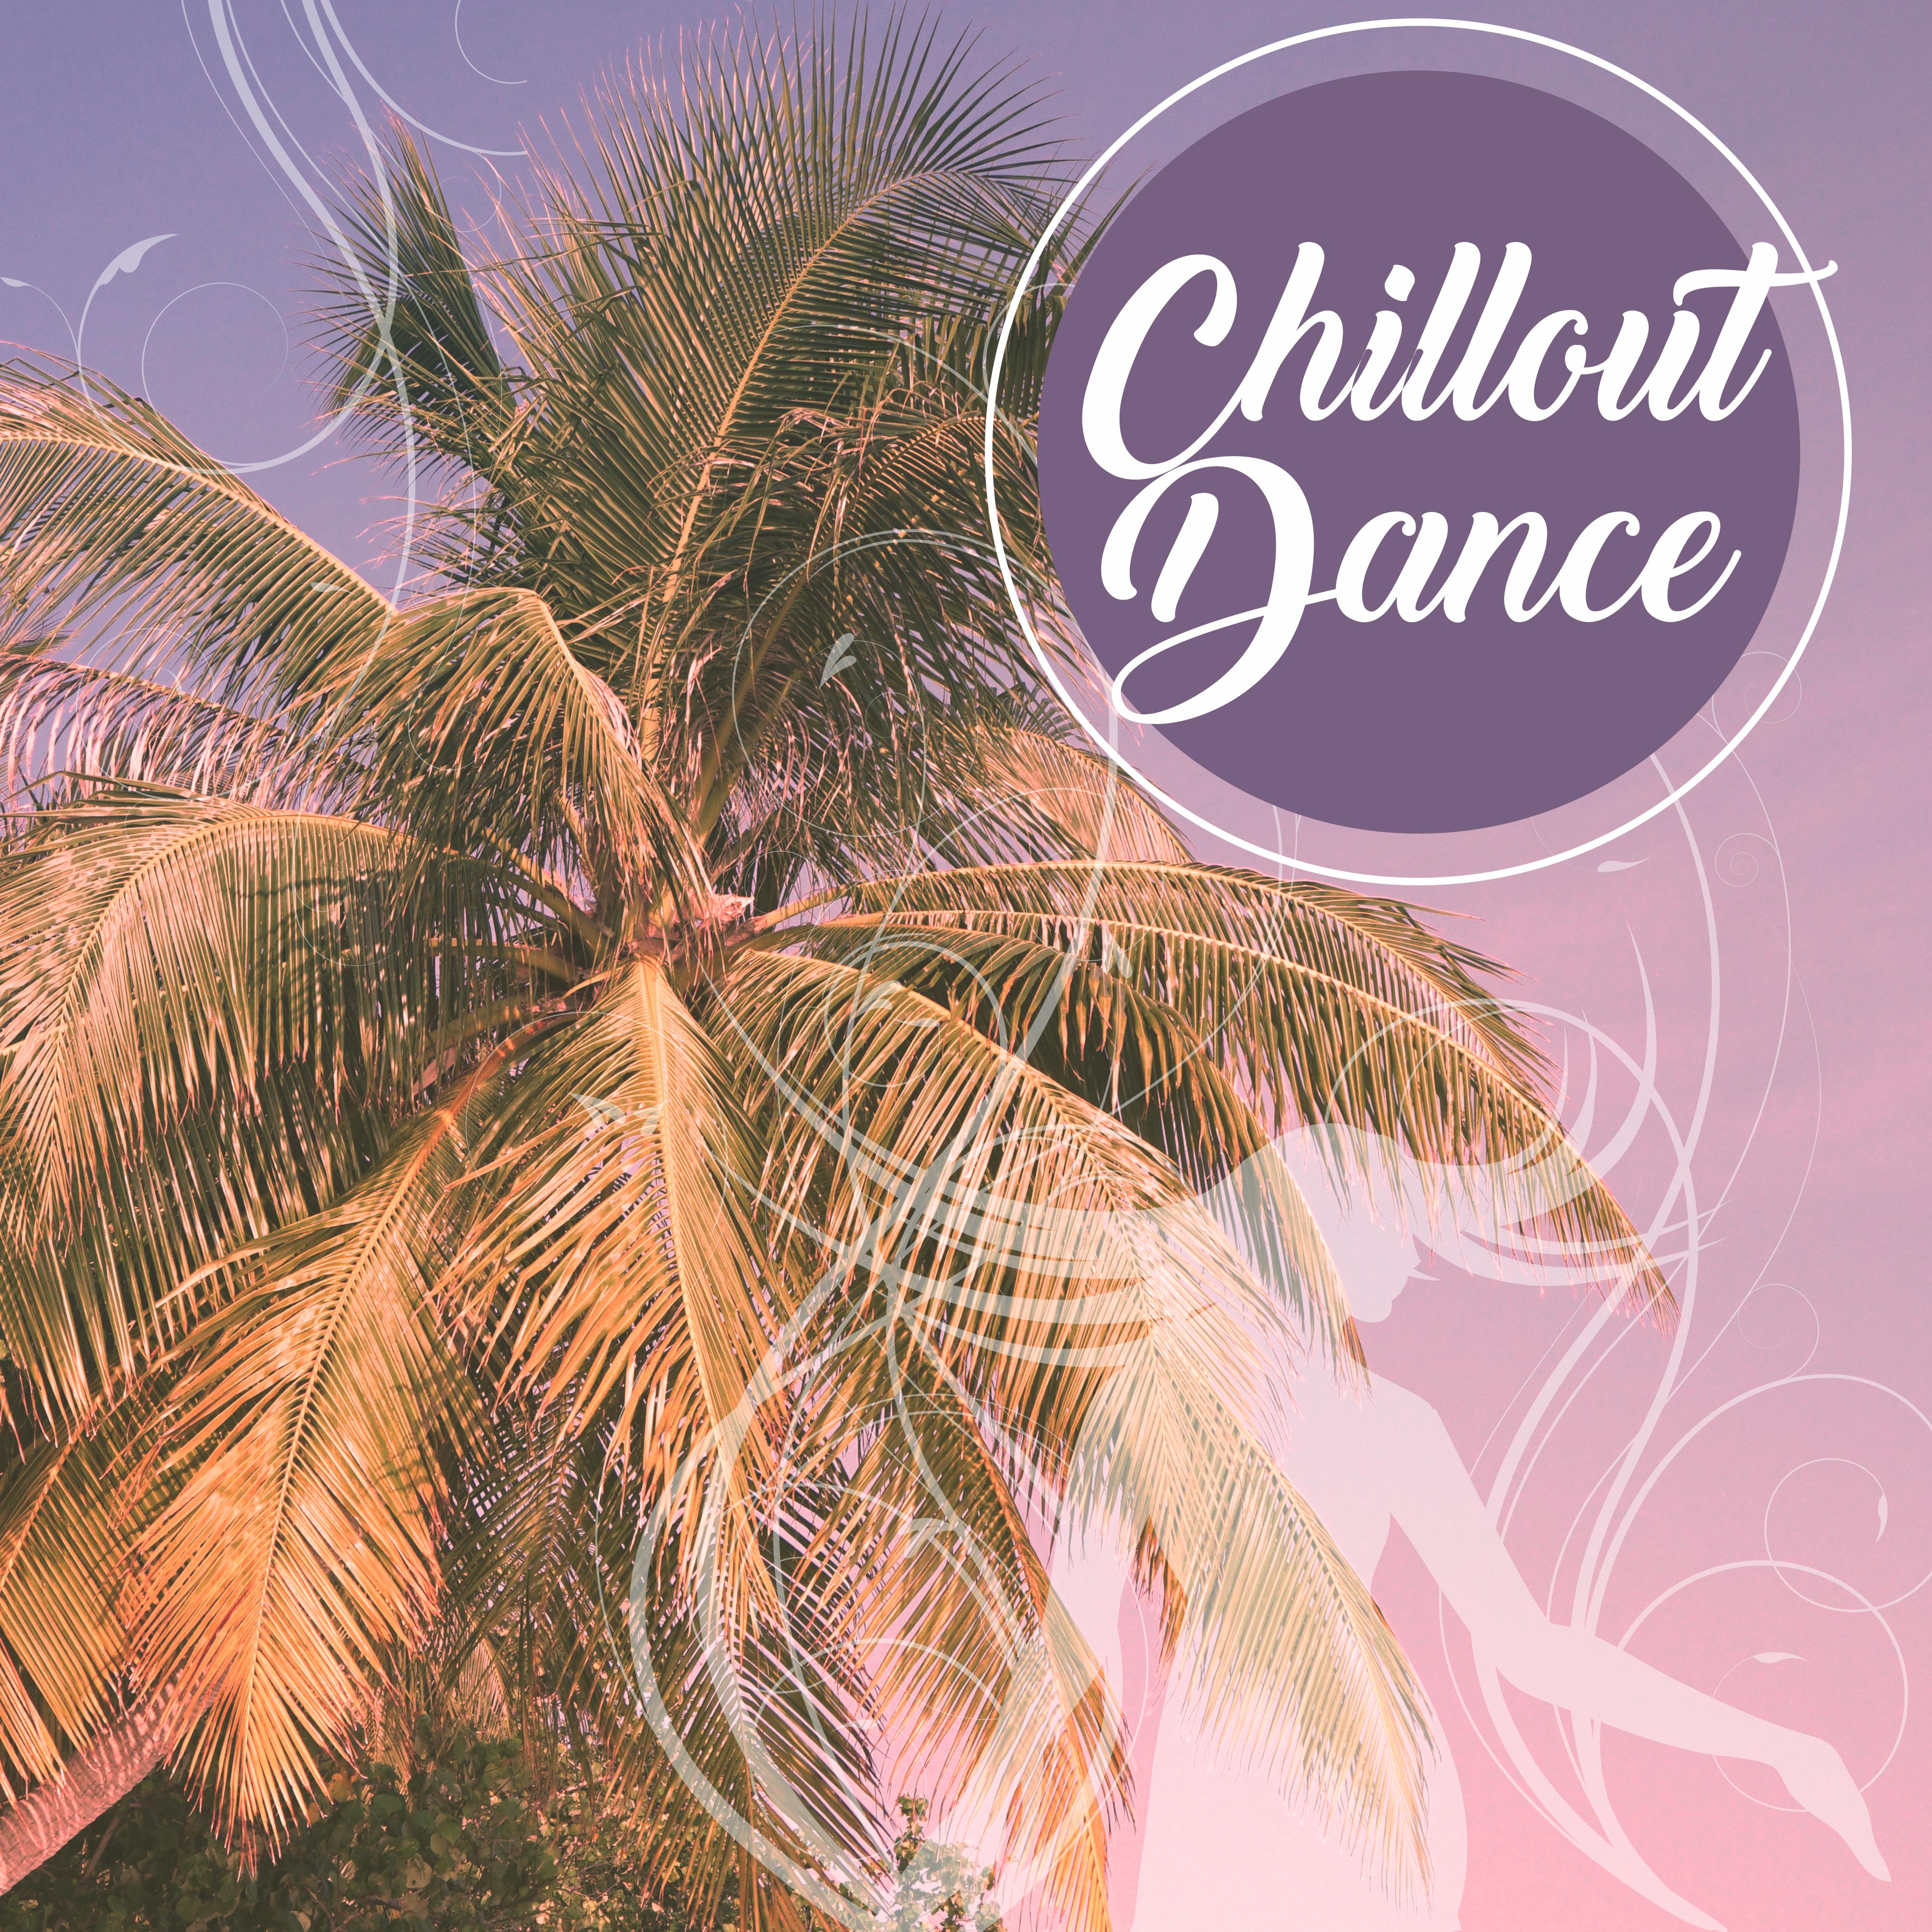 Chillout  Dance  Deep Chill Out Music, Electronic Sounds, Dance Music, After Party